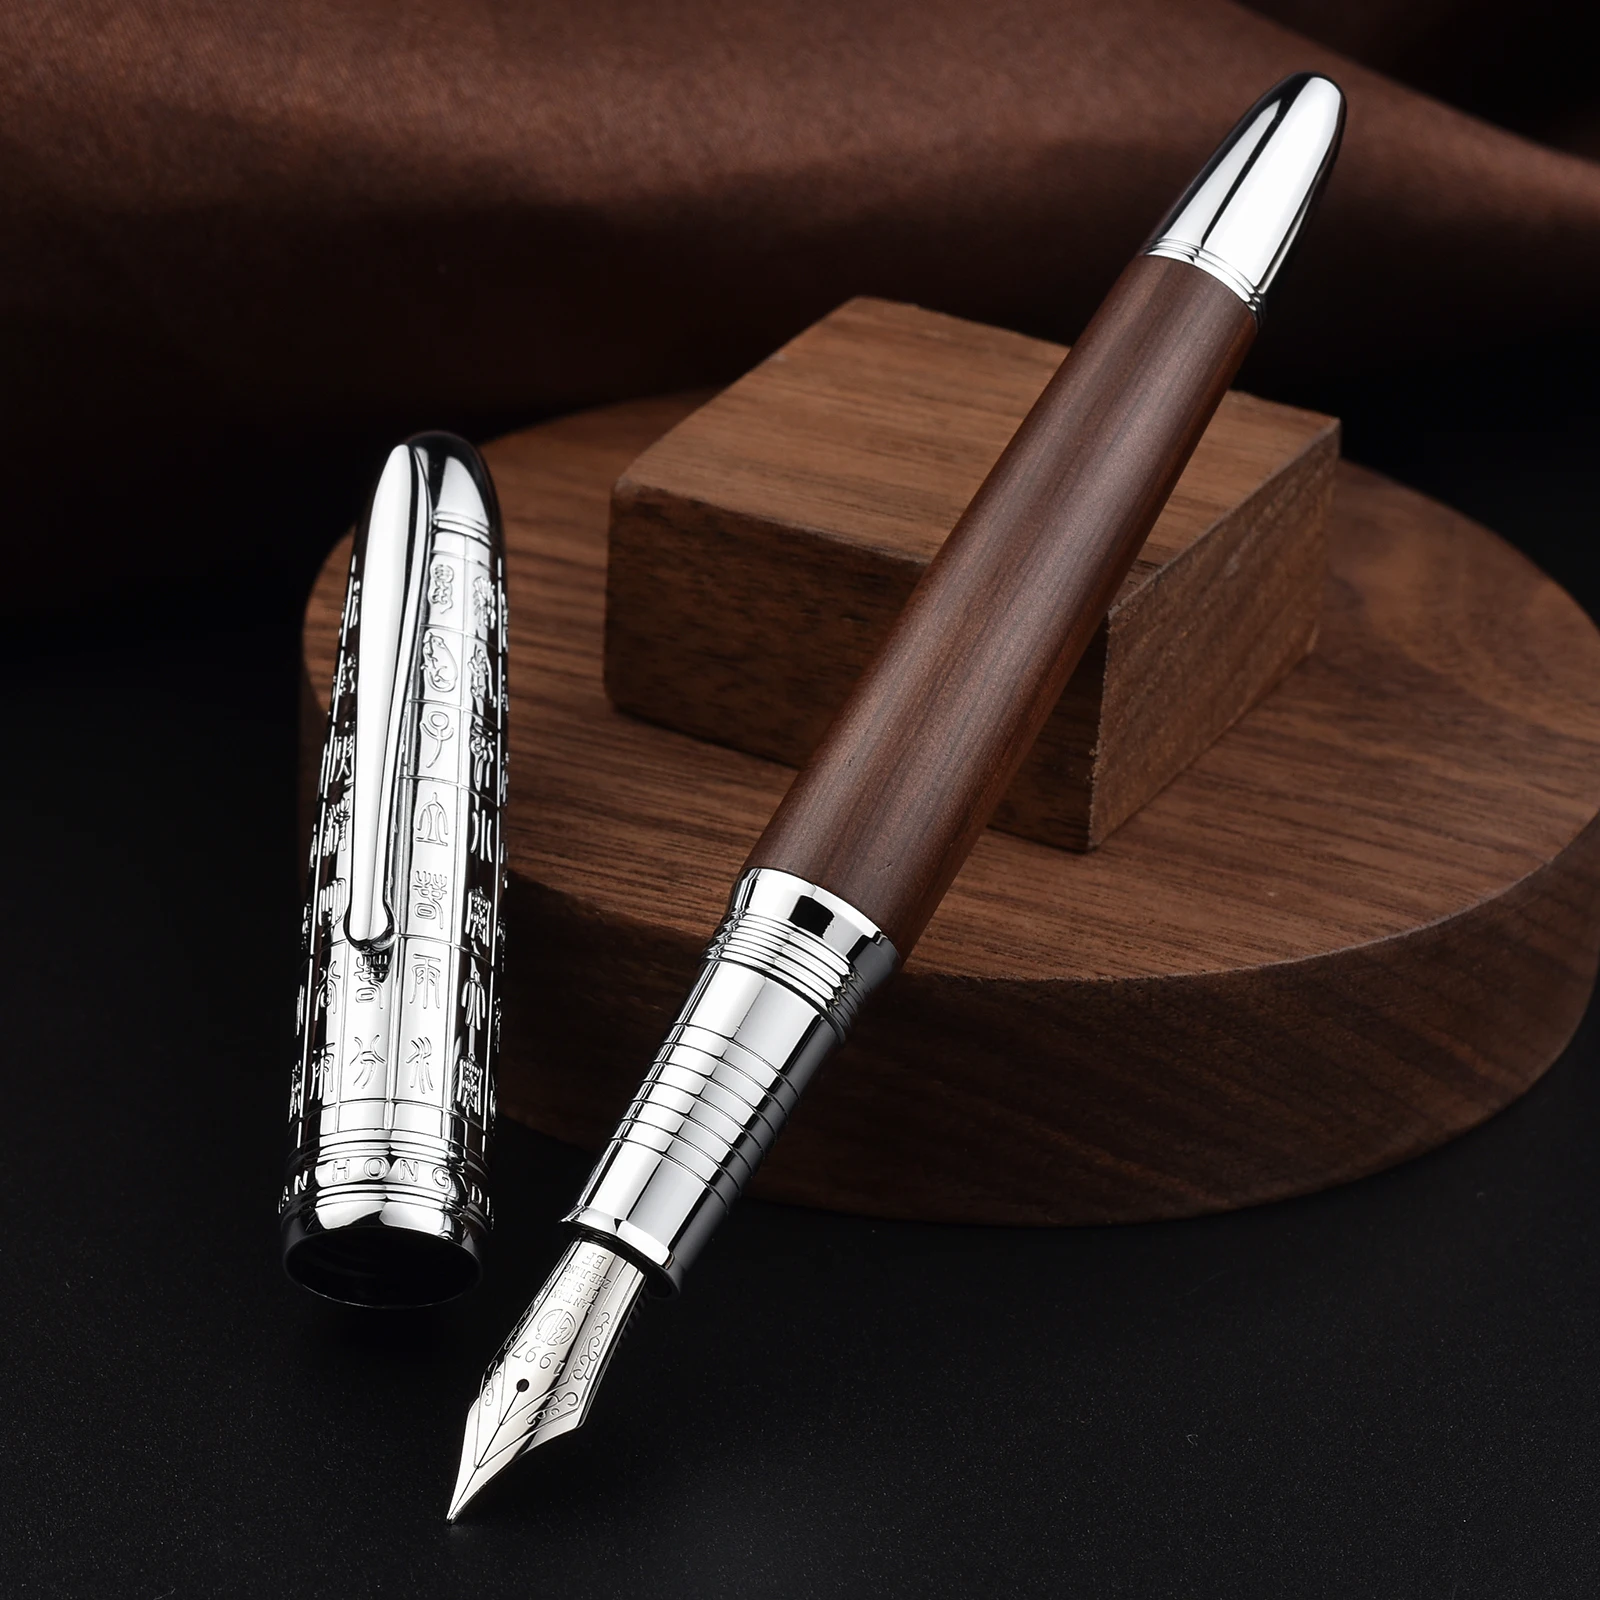 Retro Vintage 6016 Natural Wood Fountain Pen Fine Oracle Pen Cap EF/F Nib Brown Wooden Office Business Writing Ink Gift